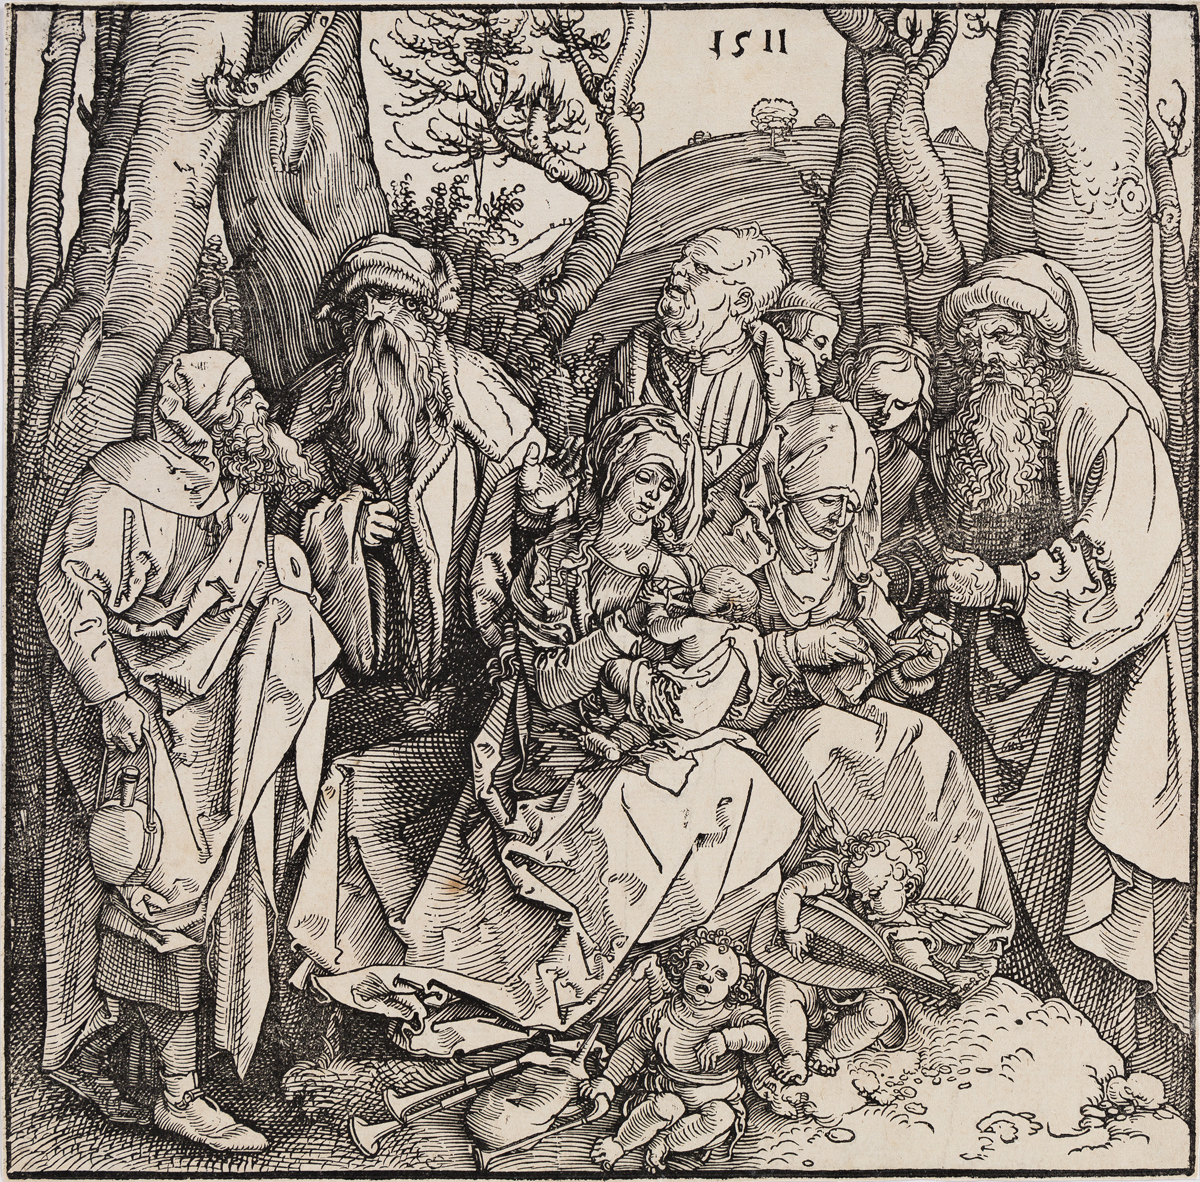 ALBRECHT DÜRER The Holy Kinship with the Lute-Playing Angels.